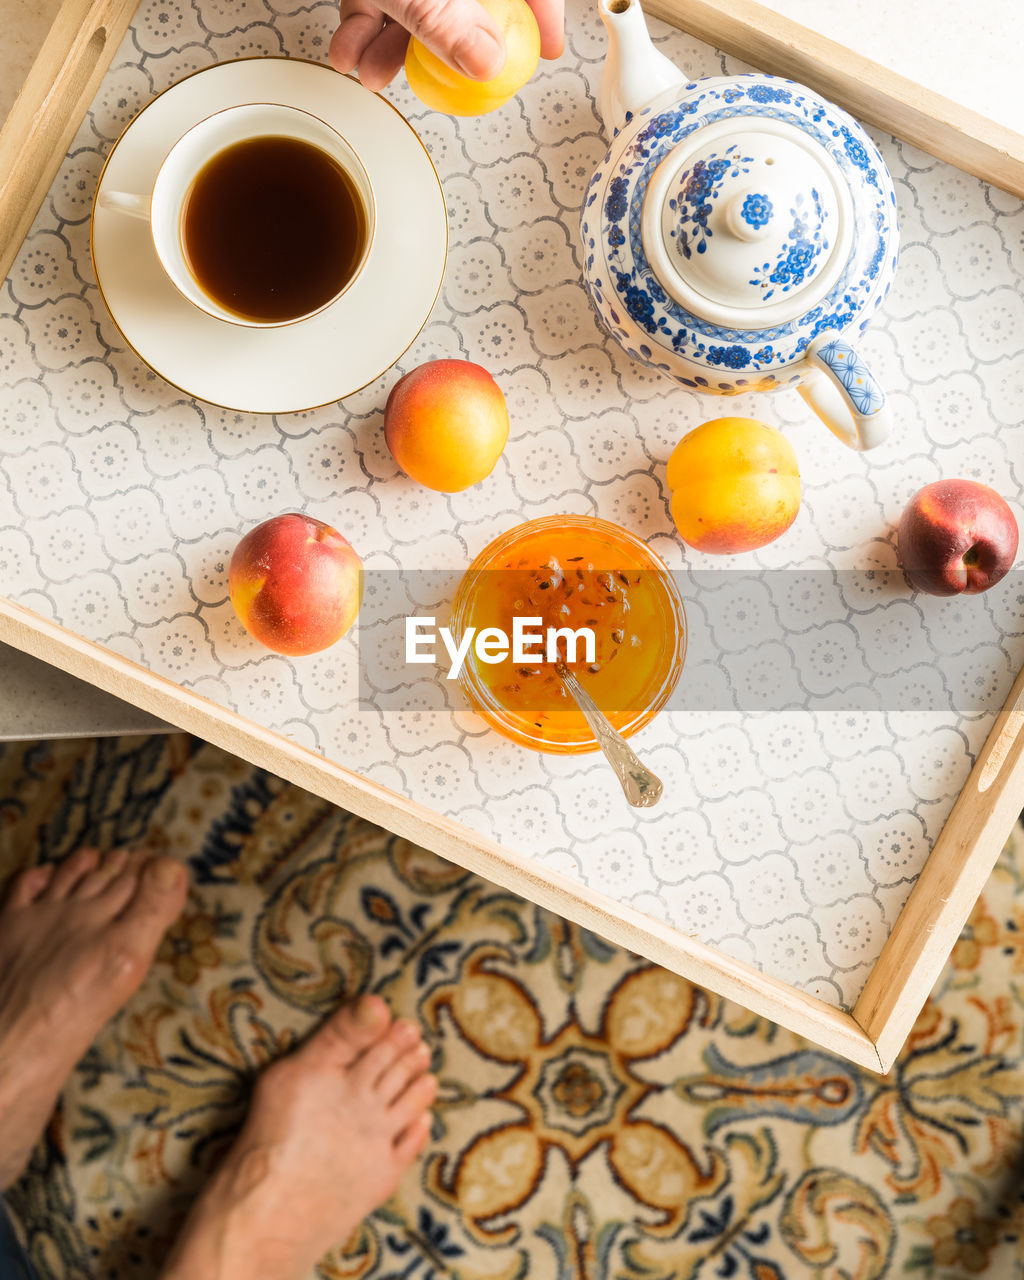 Woman's breakfast on a tray with tea, jam, fresh fruit. view from above